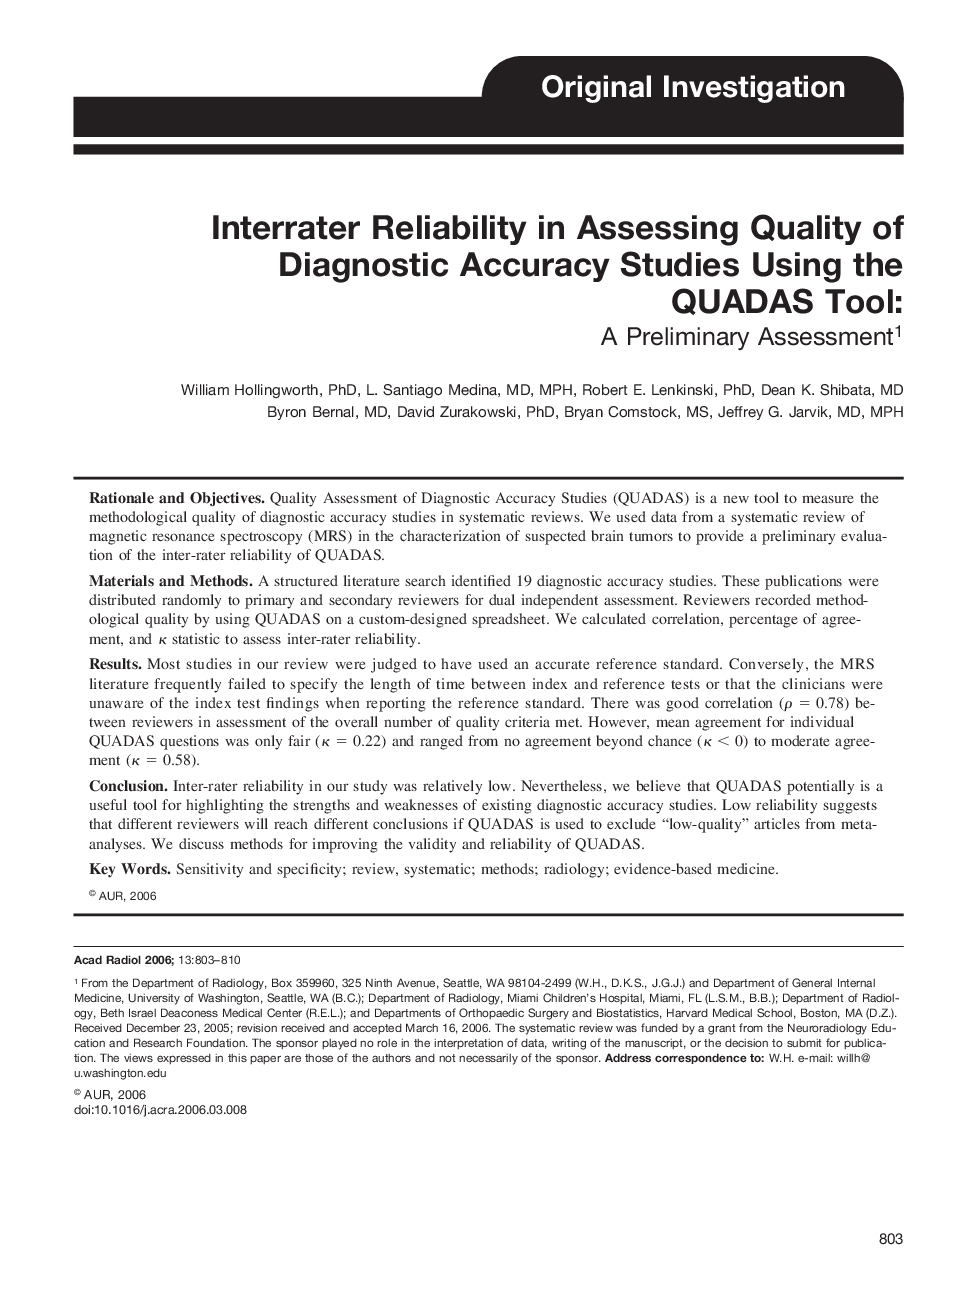 Interrater Reliability in Assessing Quality of Diagnostic Accuracy Studies Using the QUADAS Tool